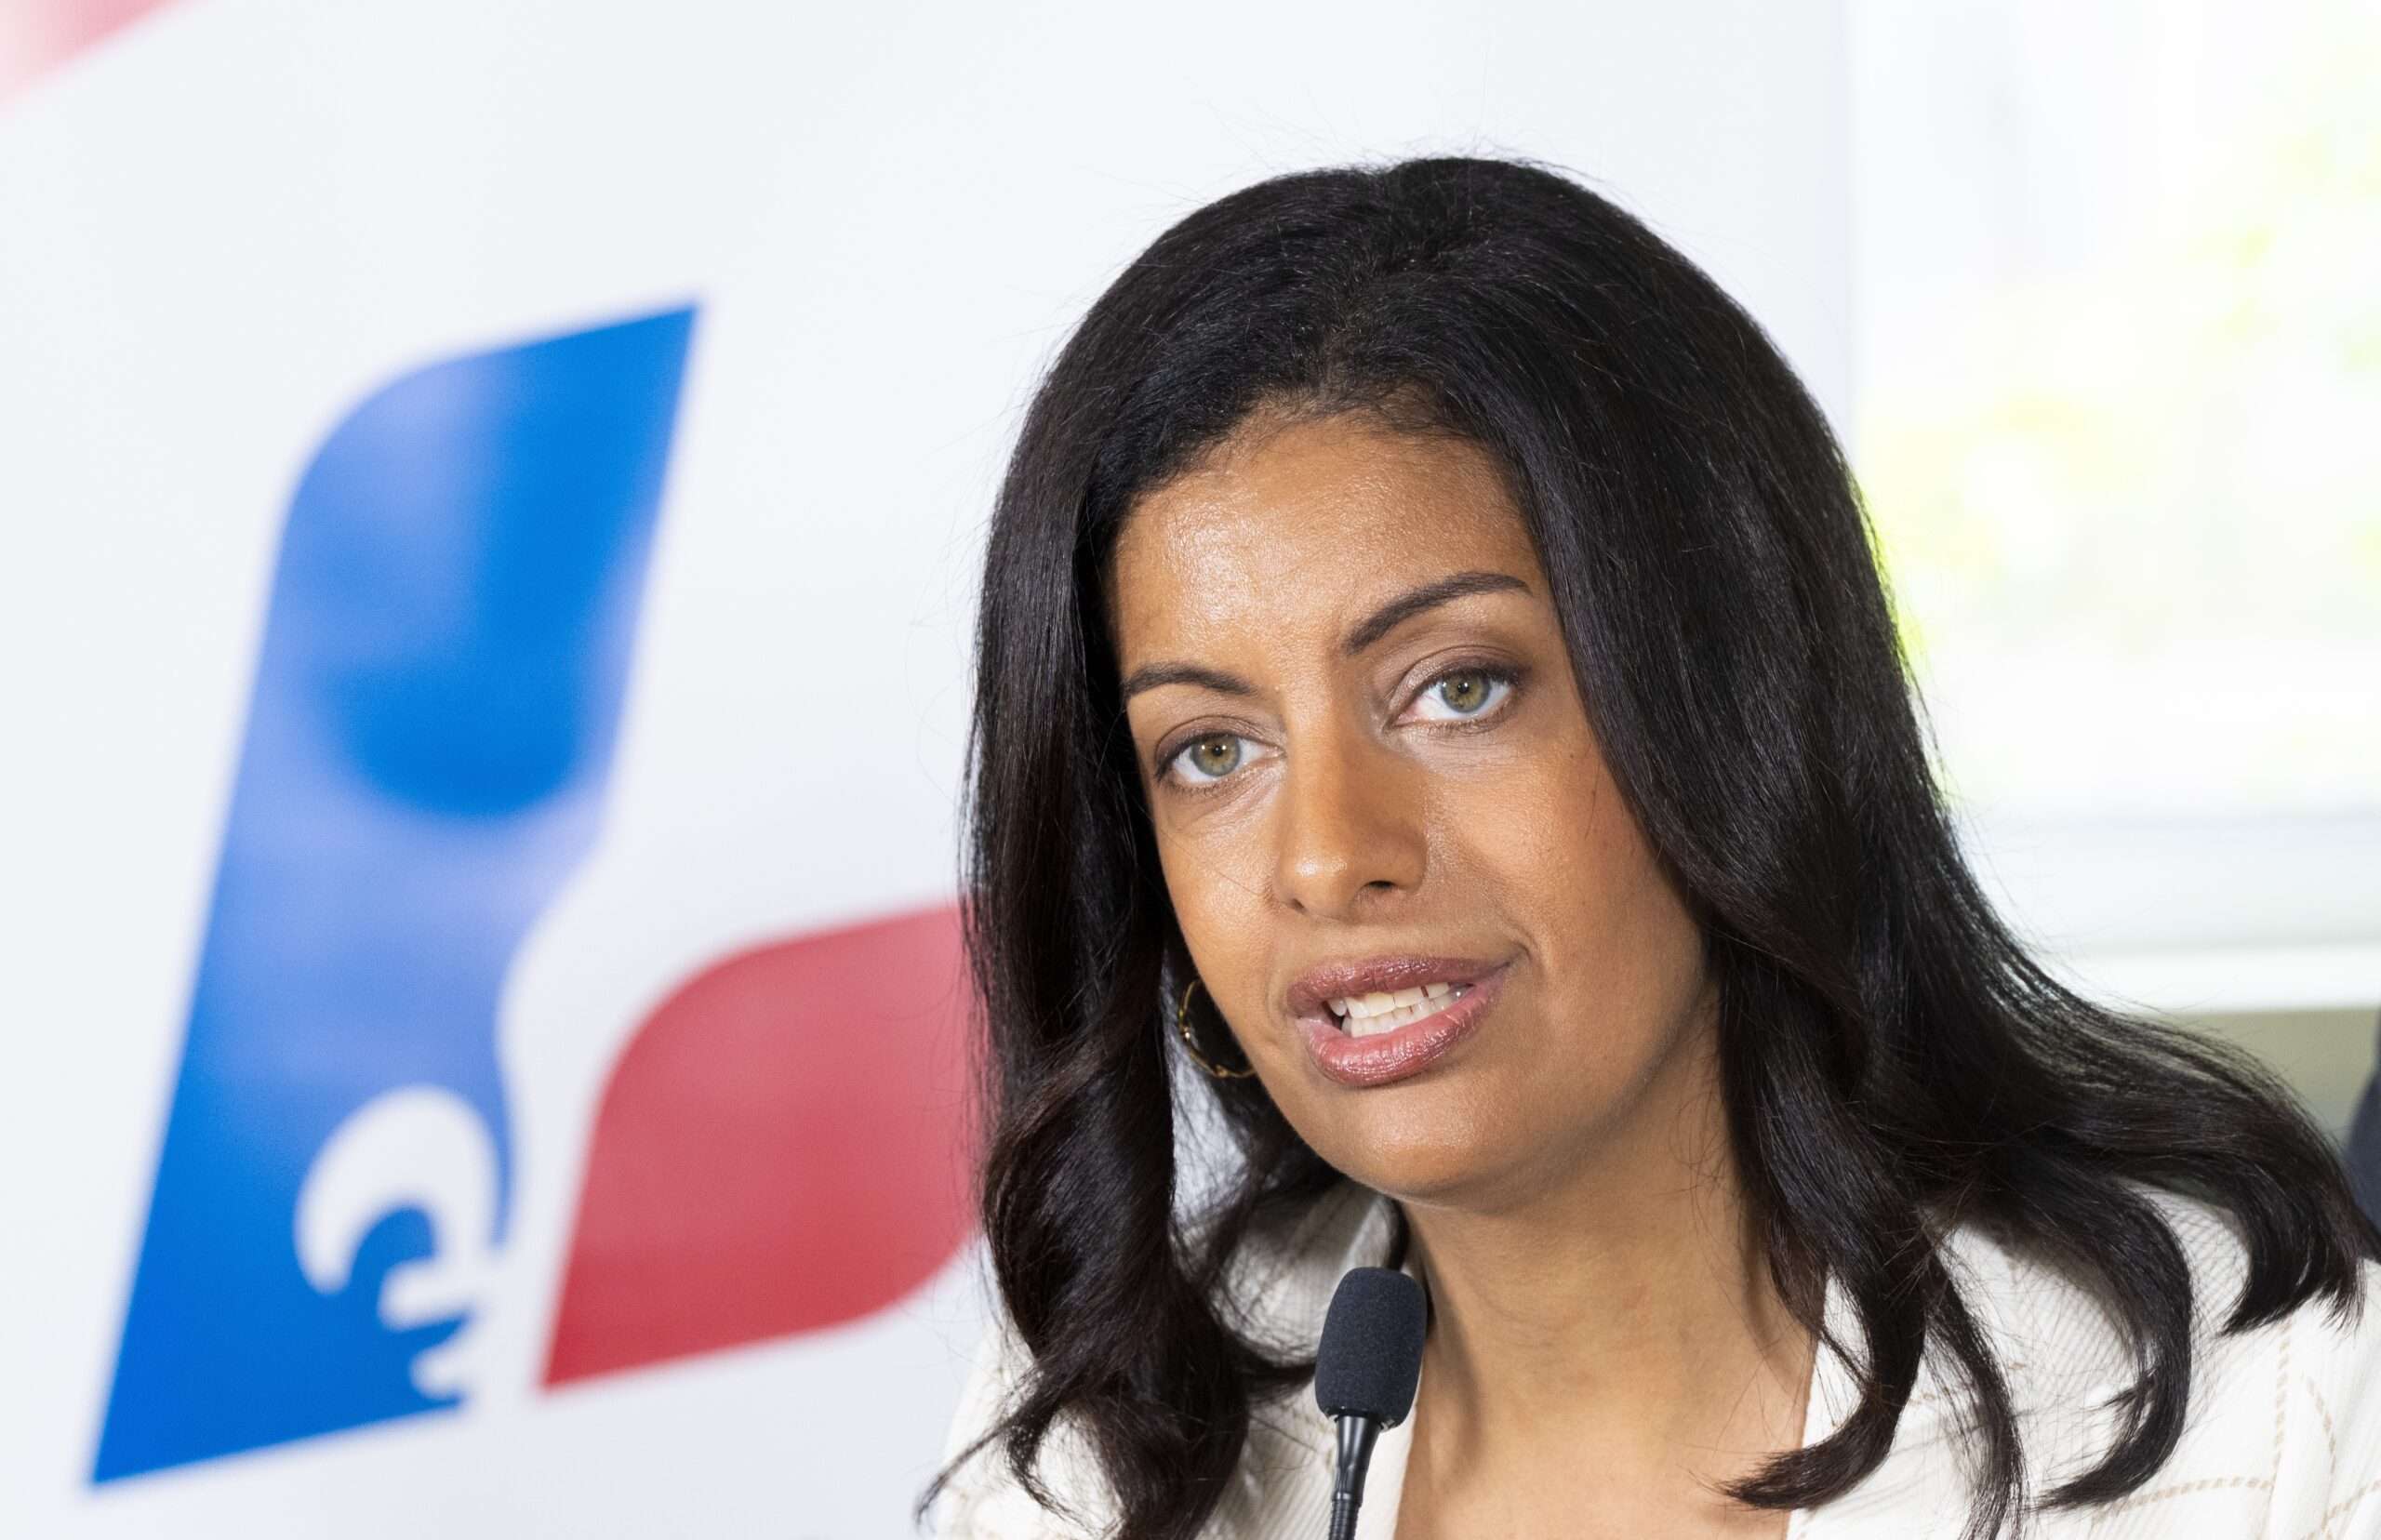 Dominique Anglade Biography: Husband, Children, Age, Net Worth, Family, Wikipedia